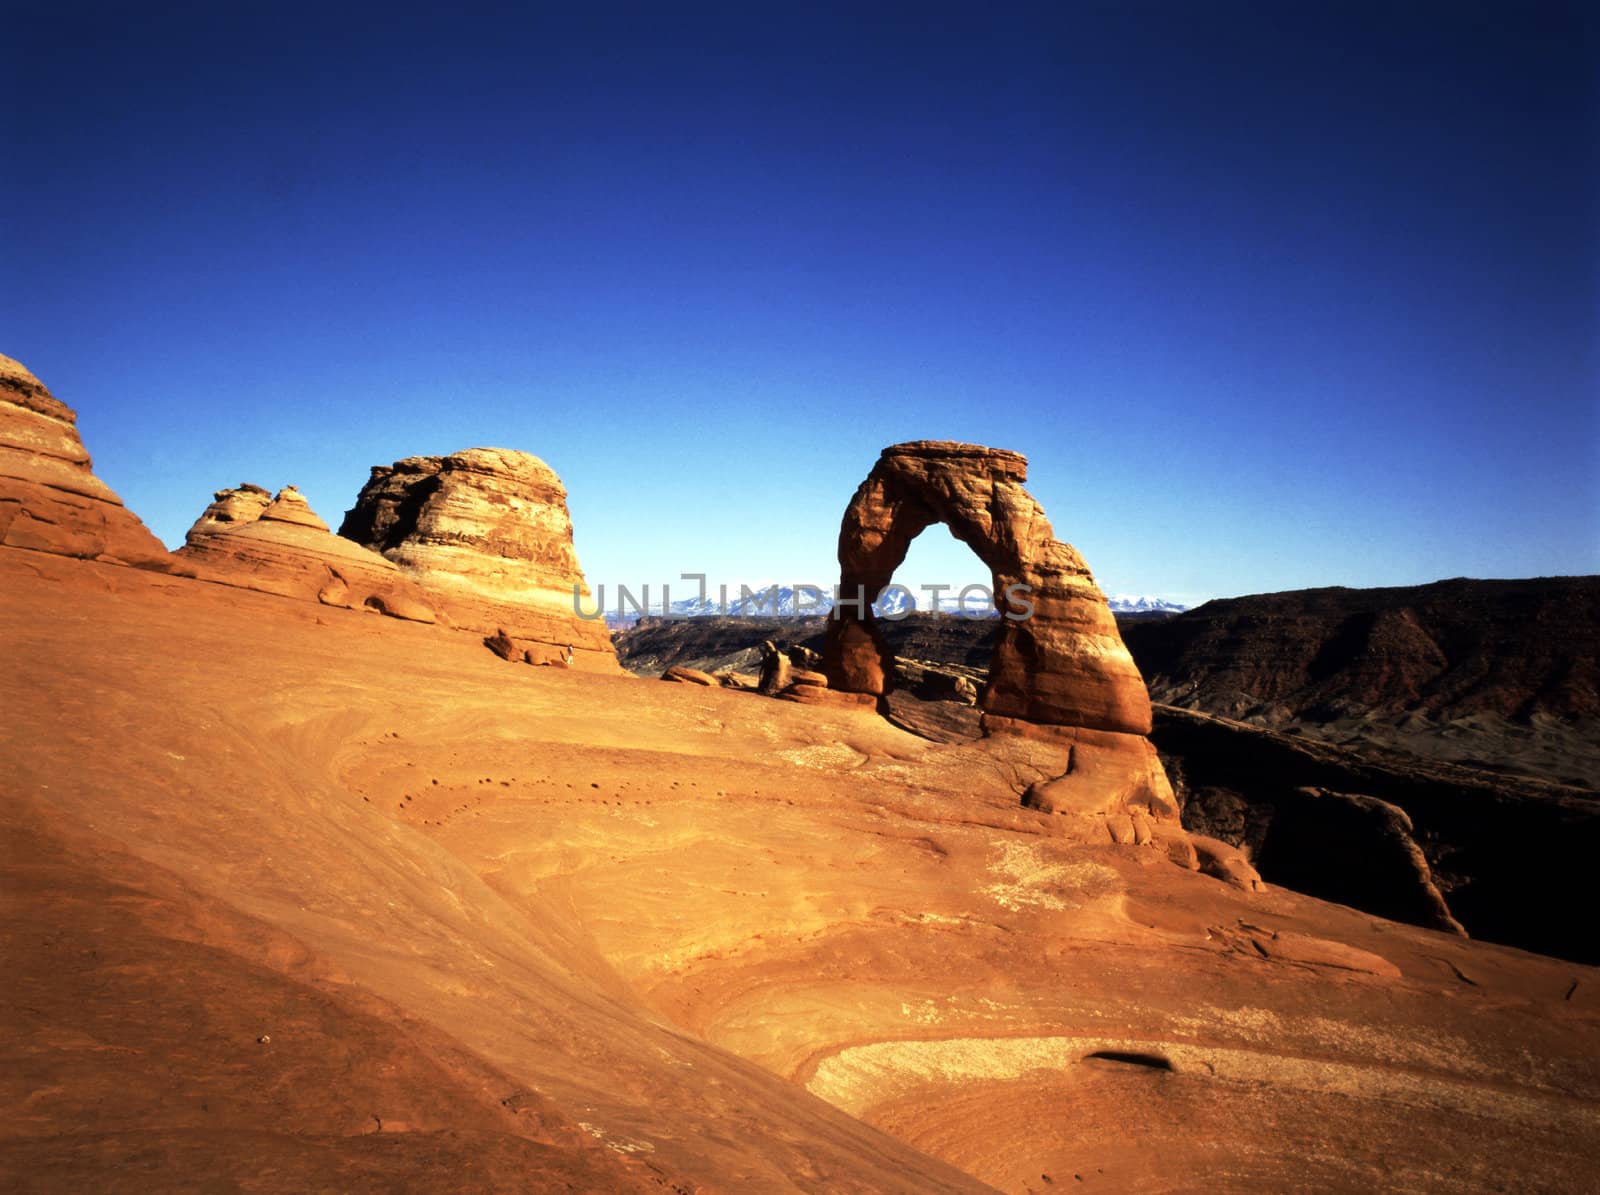 Delocate Arch in Aches National Park, Utah